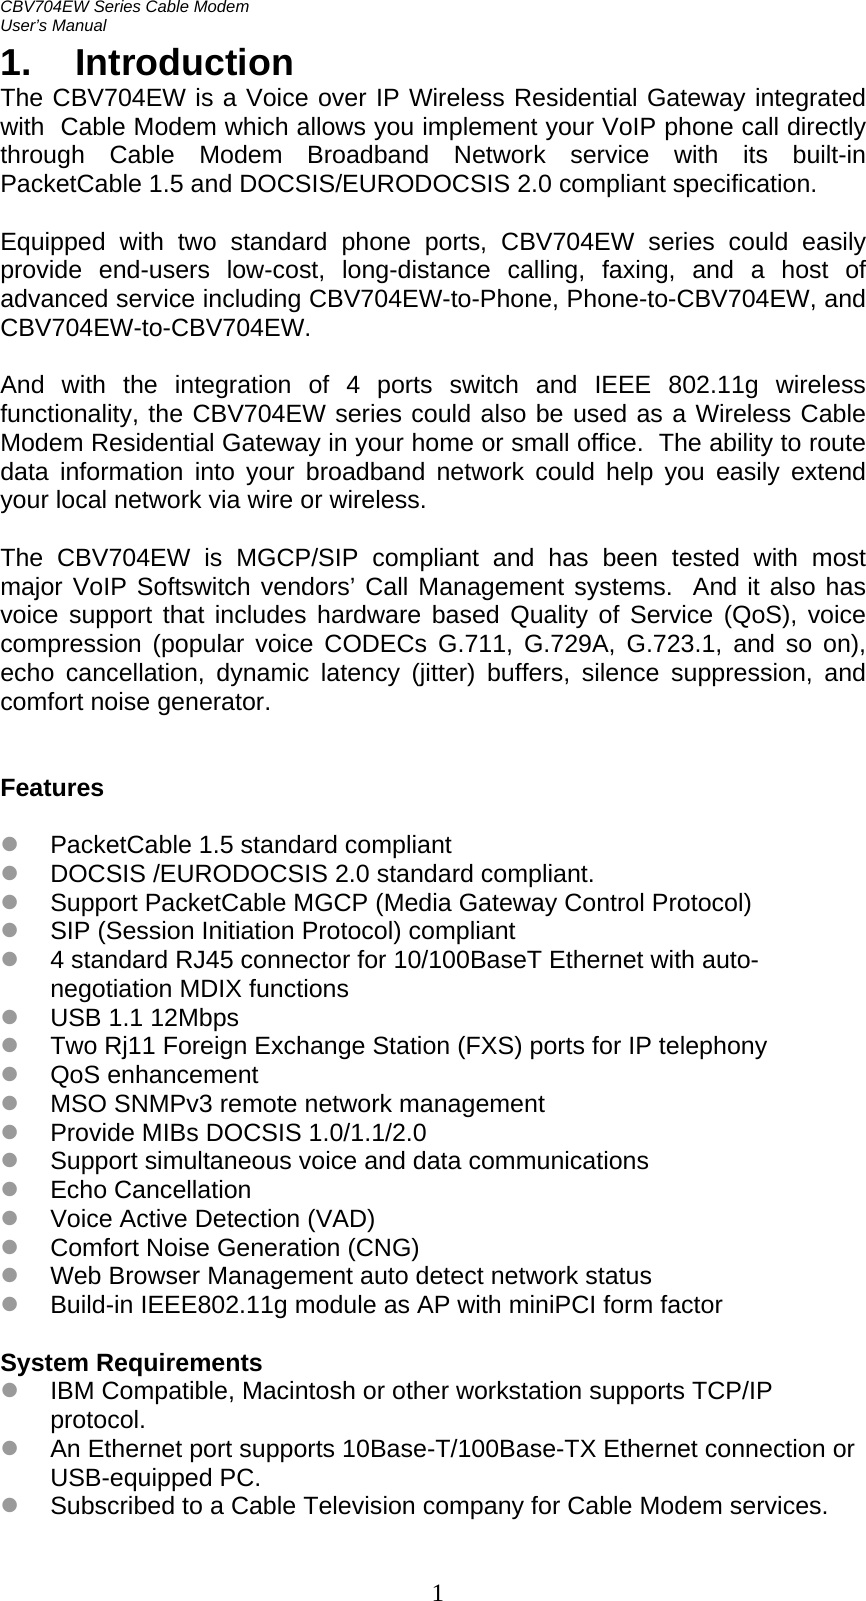 CBV704EW Series Cable Modem  User’s Manual   11. Introduction The CBV704EW is a Voice over IP Wireless Residential Gateway integrated with  Cable Modem which allows you implement your VoIP phone call directly through Cable Modem Broadband Network service with its built-in PacketCable 1.5 and DOCSIS/EURODOCSIS 2.0 compliant specification.  Equipped with two standard phone ports, CBV704EW series could easily provide end-users low-cost, long-distance calling, faxing, and a host of advanced service including CBV704EW-to-Phone, Phone-to-CBV704EW, and CBV704EW-to-CBV704EW.  And with the integration of 4 ports switch and IEEE 802.11g wireless functionality, the CBV704EW series could also be used as a Wireless Cable Modem Residential Gateway in your home or small office.  The ability to route data information into your broadband network could help you easily extend your local network via wire or wireless.  The CBV704EW is MGCP/SIP compliant and has been tested with most major VoIP Softswitch vendors’ Call Management systems.  And it also has voice support that includes hardware based Quality of Service (QoS), voice compression (popular voice CODECs G.711, G.729A, G.723.1, and so on), echo cancellation, dynamic latency (jitter) buffers, silence suppression, and comfort noise generator.   Features  z PacketCable 1.5 standard compliant z DOCSIS /EURODOCSIS 2.0 standard compliant. z Support PacketCable MGCP (Media Gateway Control Protocol) z SIP (Session Initiation Protocol) compliant z 4 standard RJ45 connector for 10/100BaseT Ethernet with auto-negotiation MDIX functions z USB 1.1 12Mbps z Two Rj11 Foreign Exchange Station (FXS) ports for IP telephony z QoS enhancement z MSO SNMPv3 remote network management z Provide MIBs DOCSIS 1.0/1.1/2.0 z Support simultaneous voice and data communications z Echo Cancellation z Voice Active Detection (VAD) z Comfort Noise Generation (CNG) z Web Browser Management auto detect network status z Build-in IEEE802.11g module as AP with miniPCI form factor  System Requirements z IBM Compatible, Macintosh or other workstation supports TCP/IP protocol. z An Ethernet port supports 10Base-T/100Base-TX Ethernet connection or USB-equipped PC. z Subscribed to a Cable Television company for Cable Modem services.  